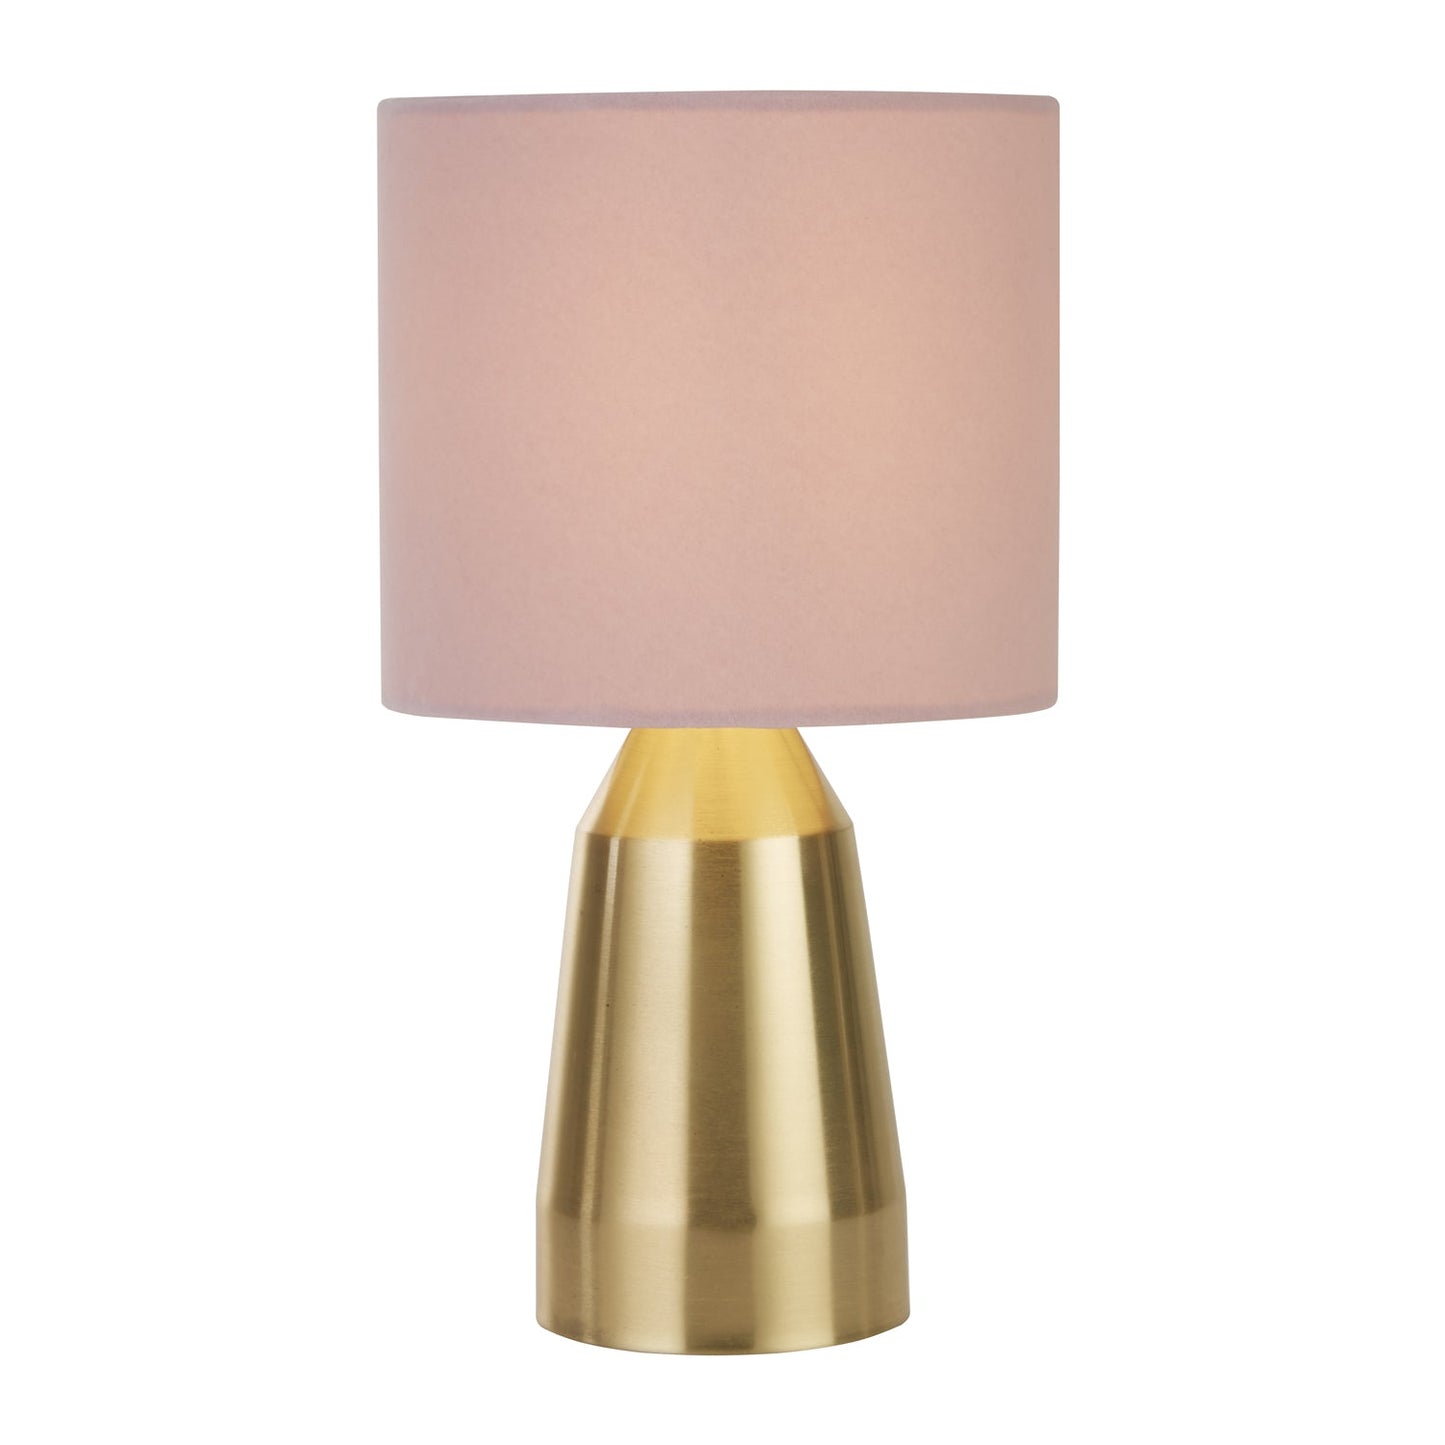 Gold Table Lamp with Blush Pink Shade